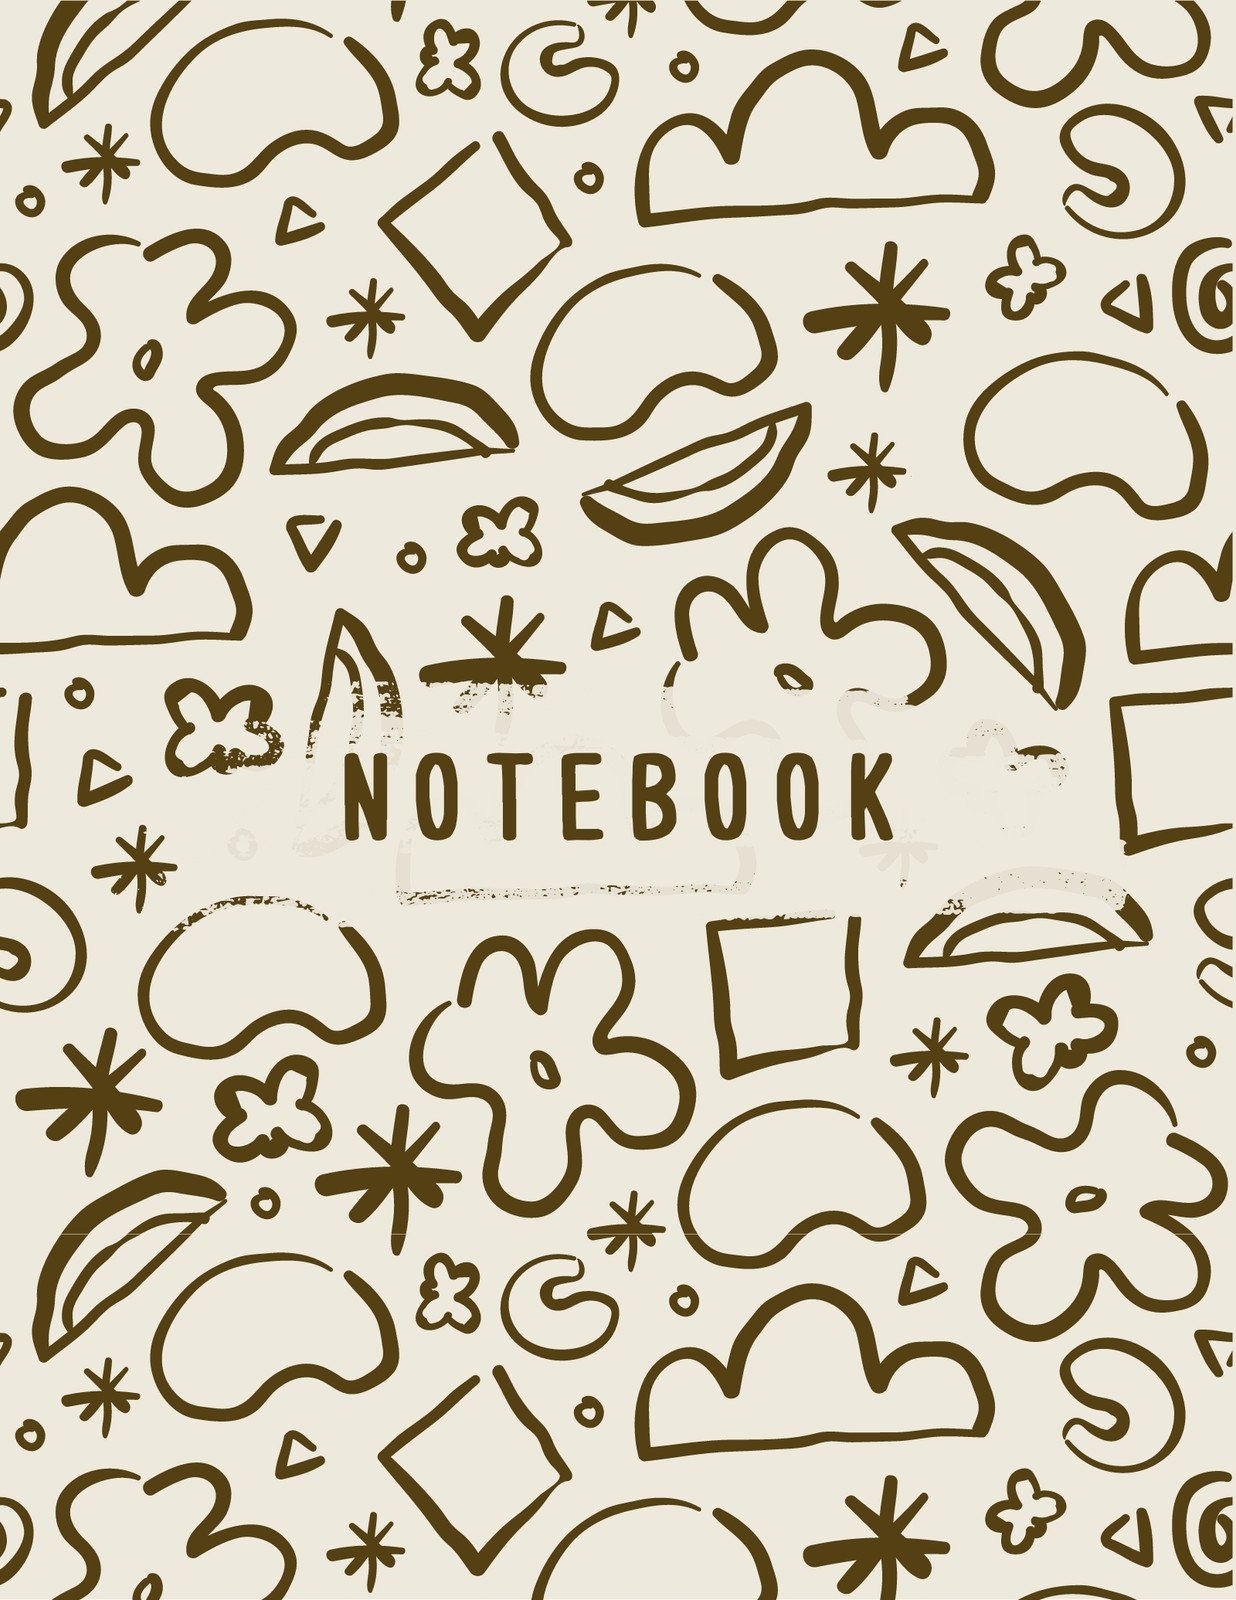 https://marketplace.canva.com/EAFcbUVe1is/1/0/1236w/canva-brown-beige-abstract-shapes-seamless-pattern-notebook-KA9PZ-dS9UU.jpg